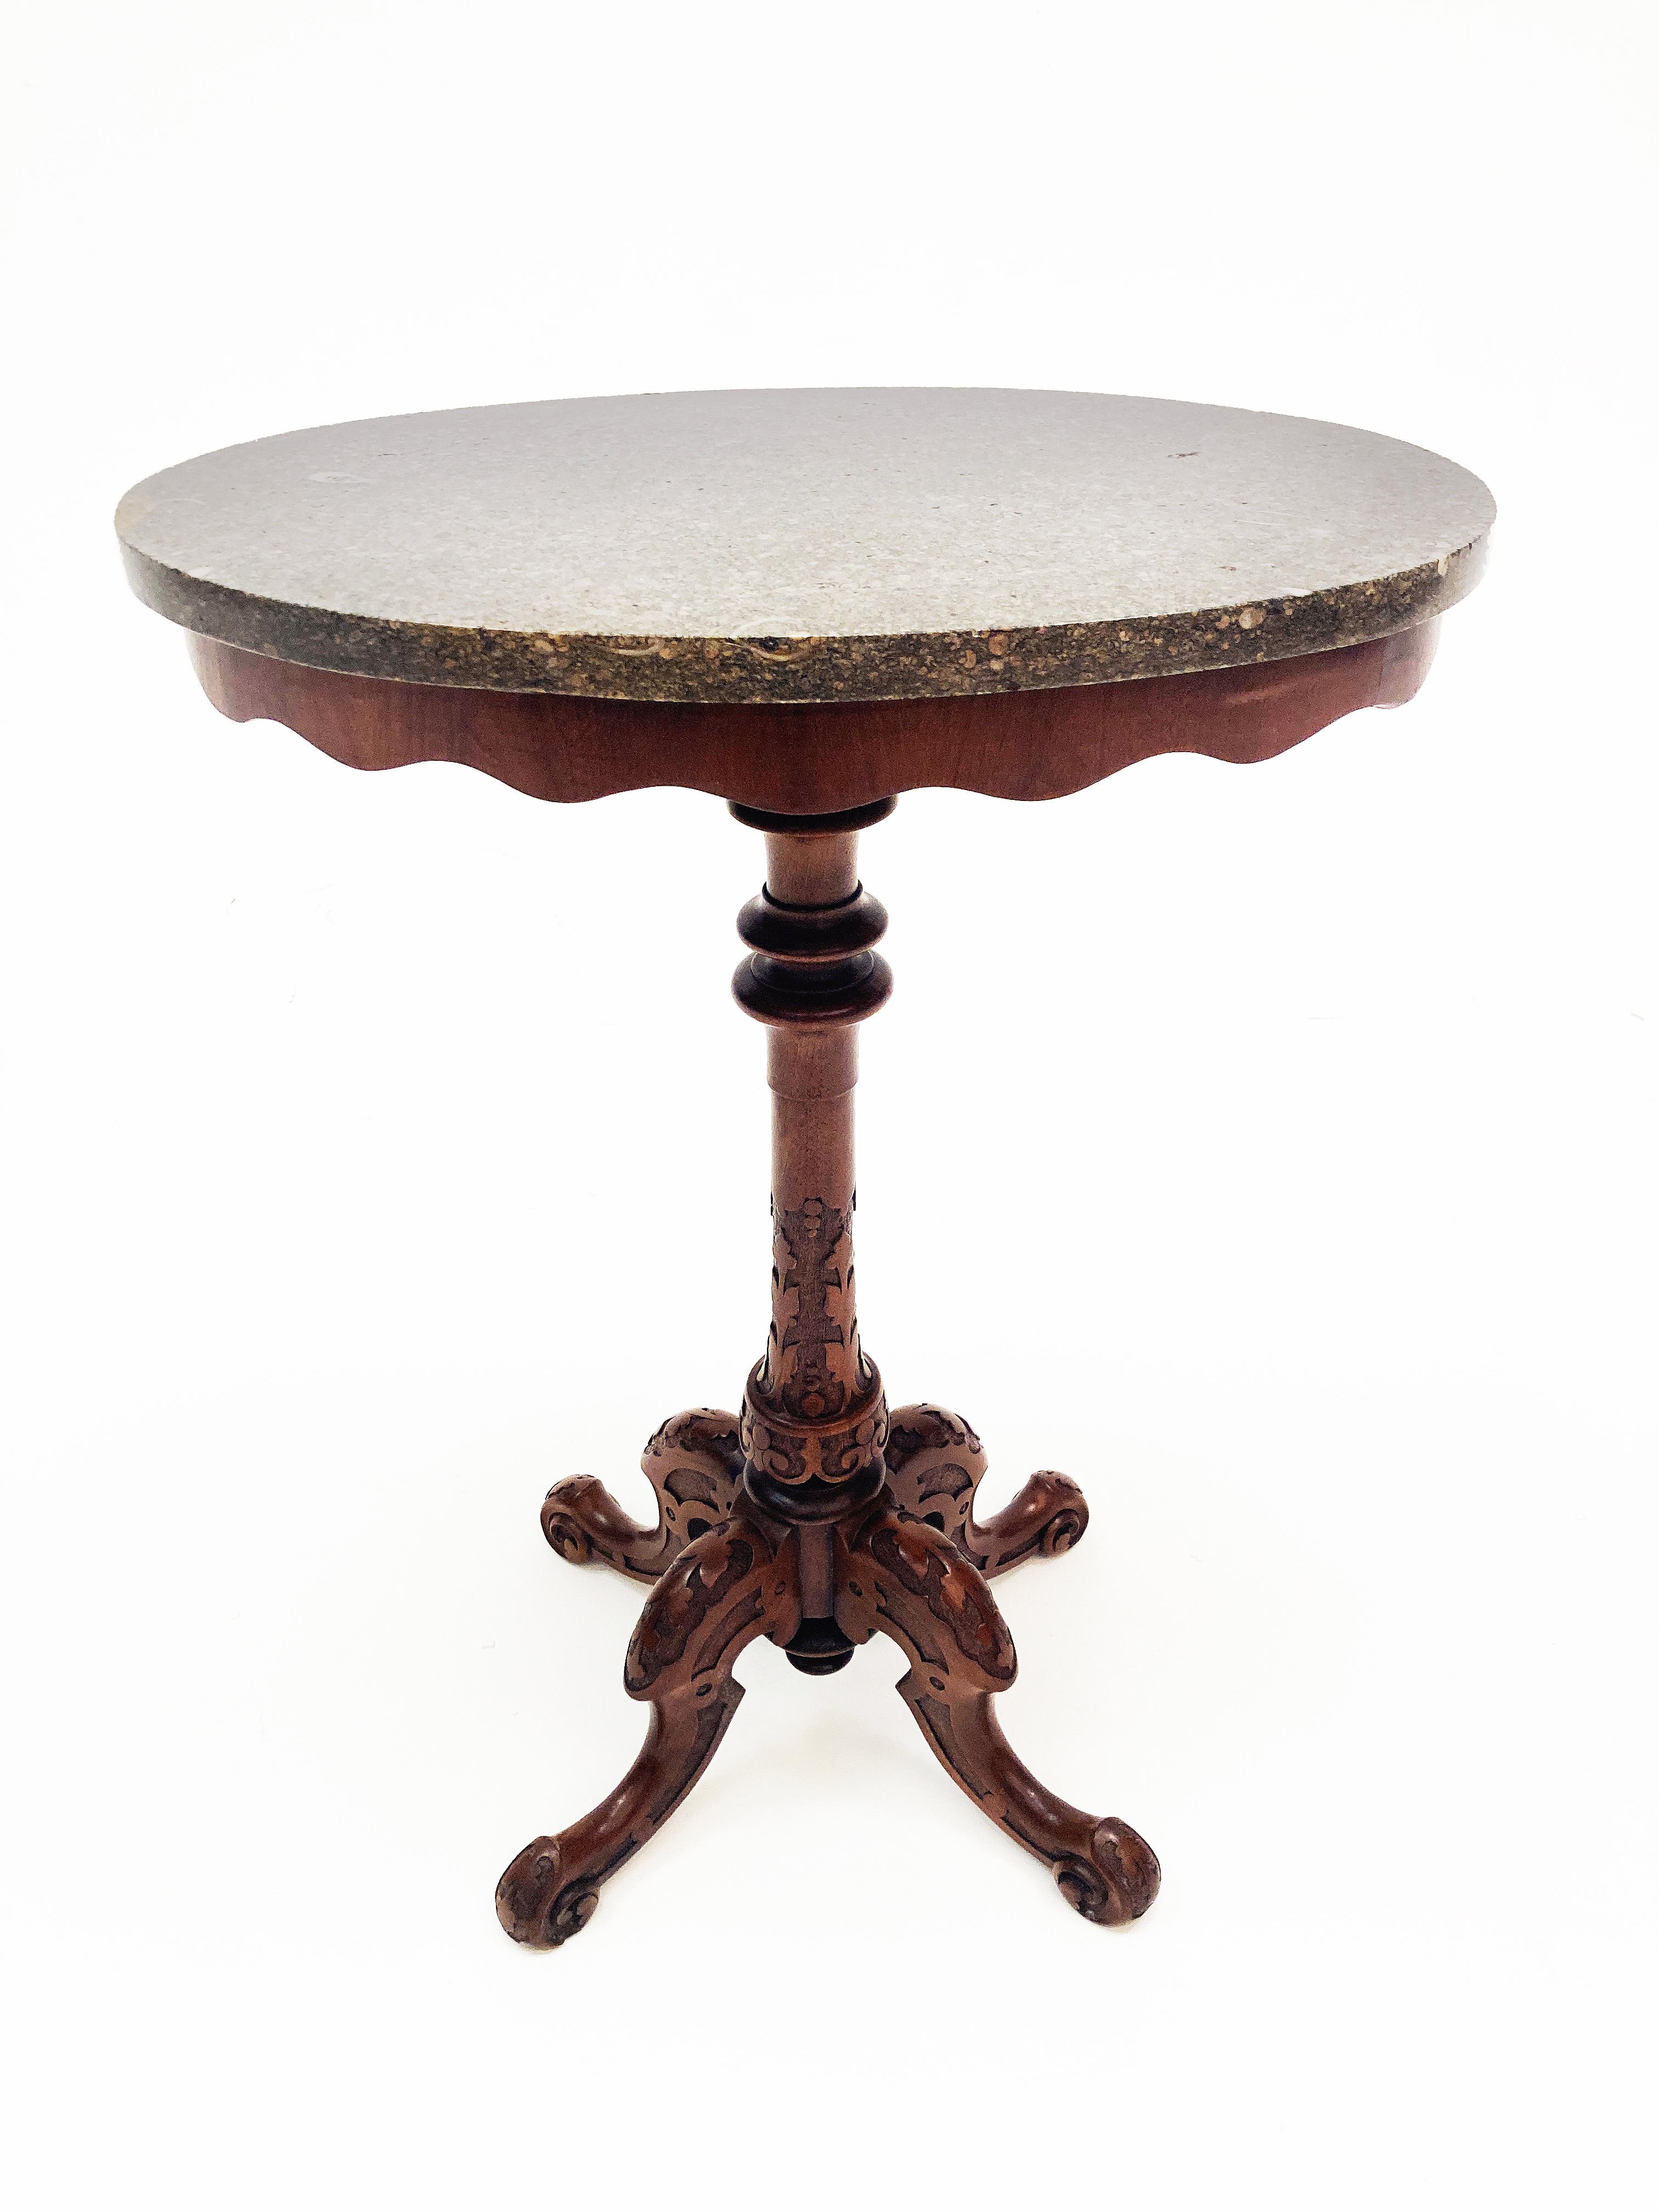 This stunning little table is a must have for those looking for a touch of unique old world craftsmanship with that right amount of rich wood and fabulous marble. This exceptional piece boasts a turned and carved single column support that finishes